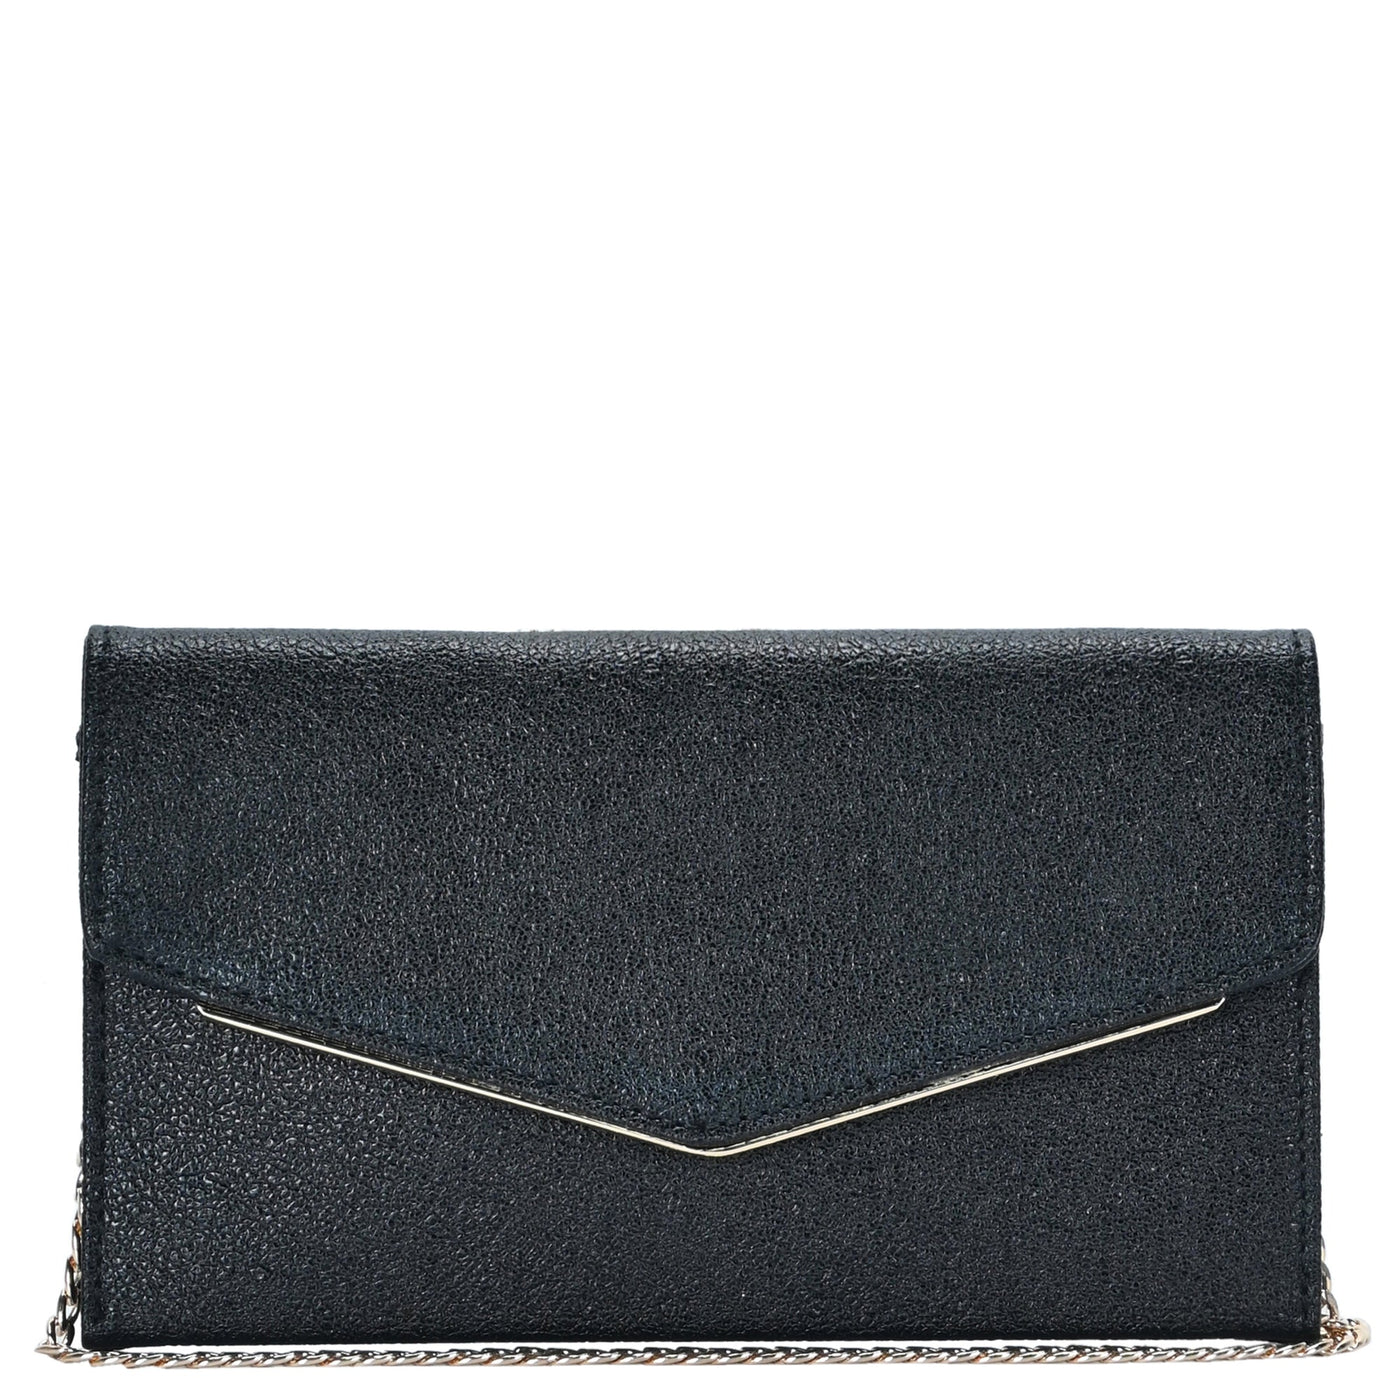 BGW47132 Sharice Envelope Clutch With Chain Strap